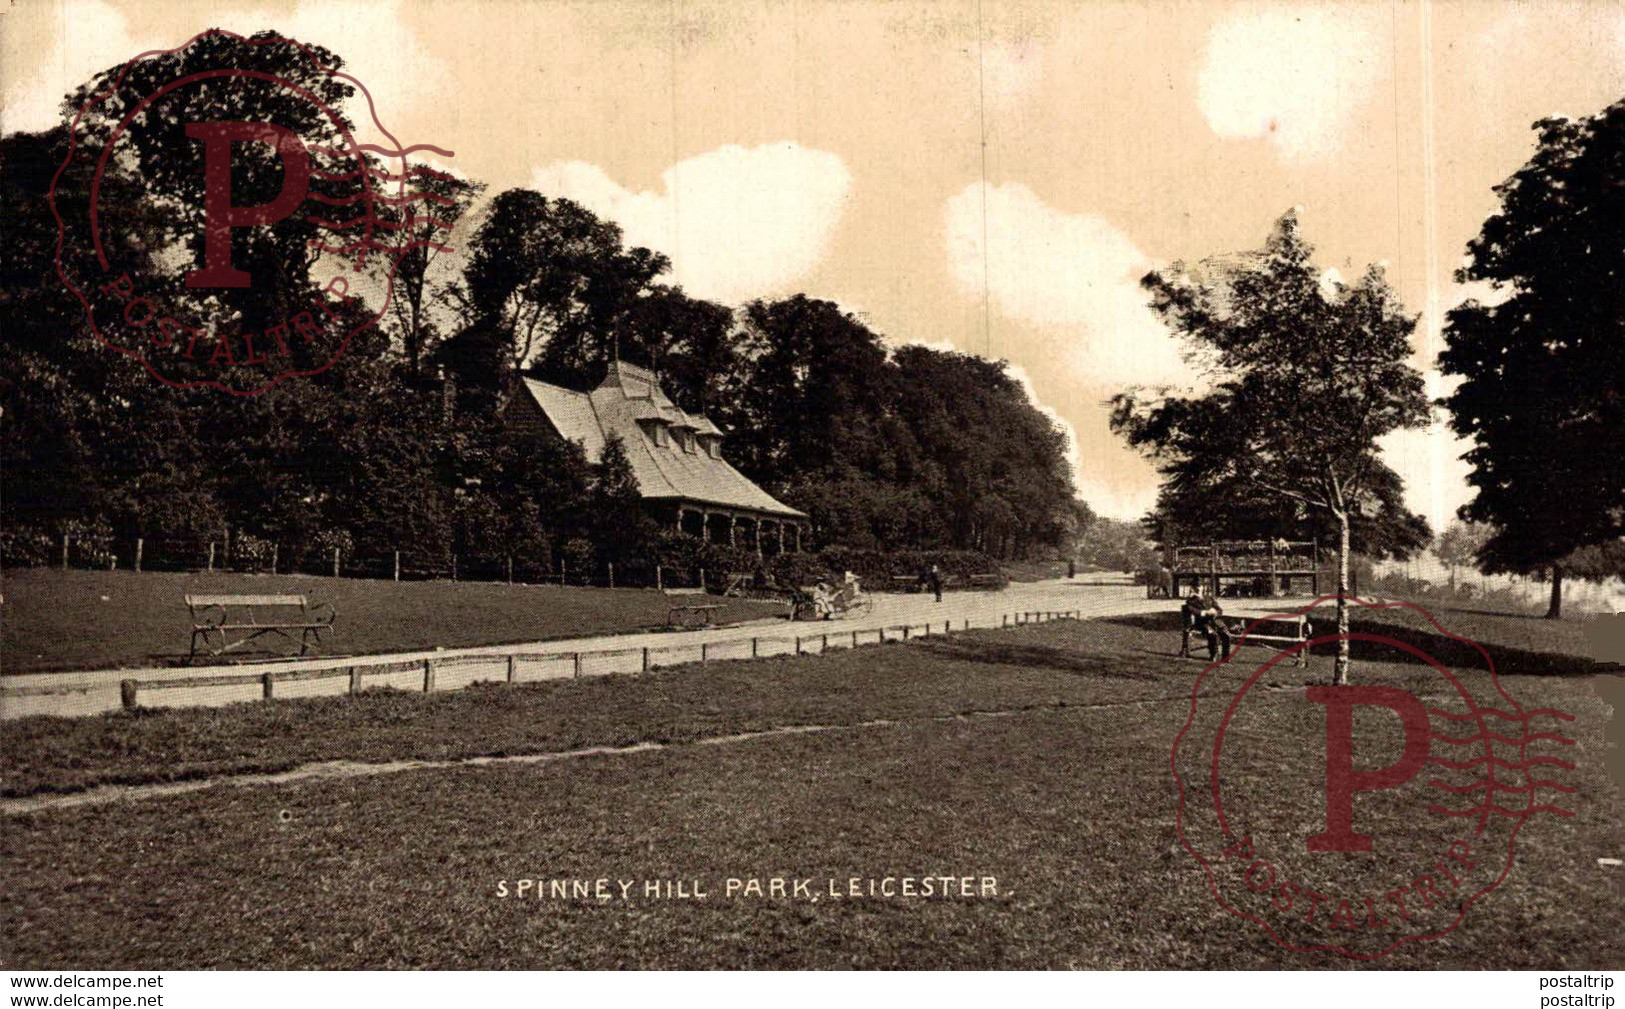 Spinney Hill Park Leicester - Leicester